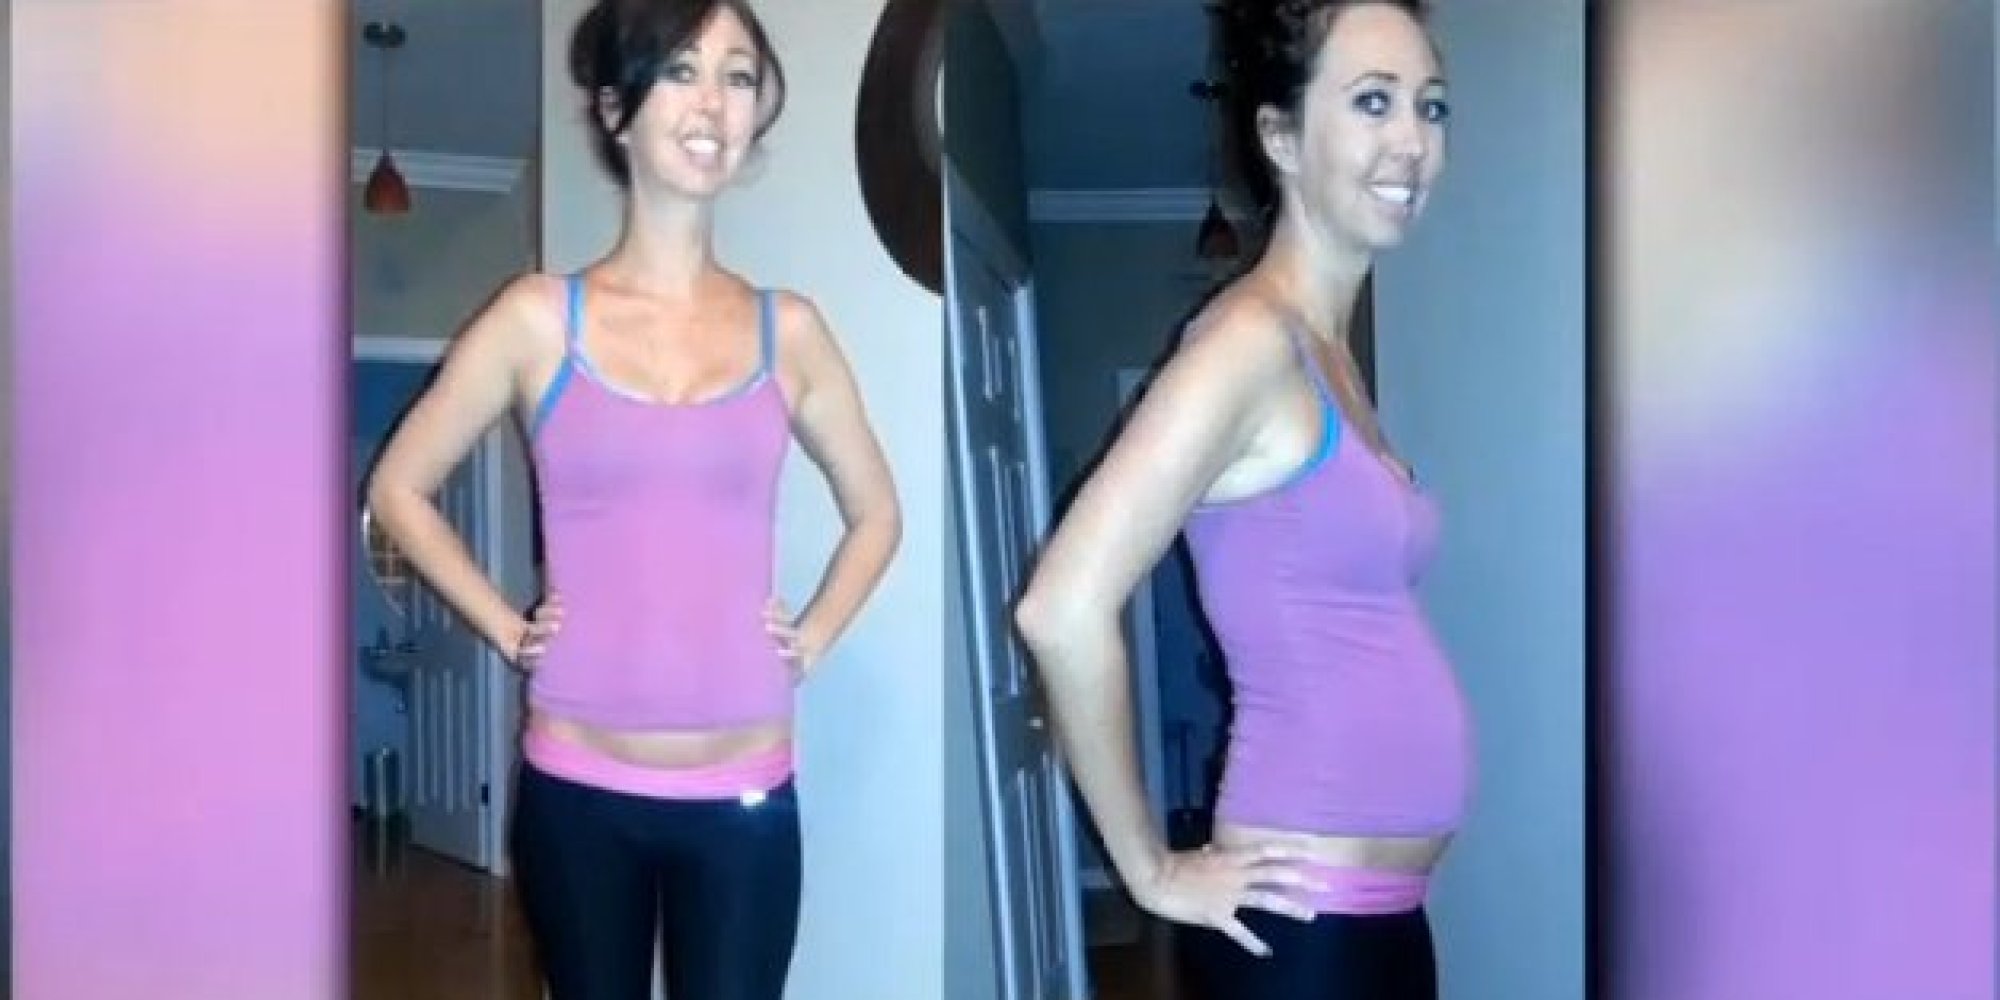 Pregnant Woman Says She Was Asked To Leave Planet Fitness For Exposed